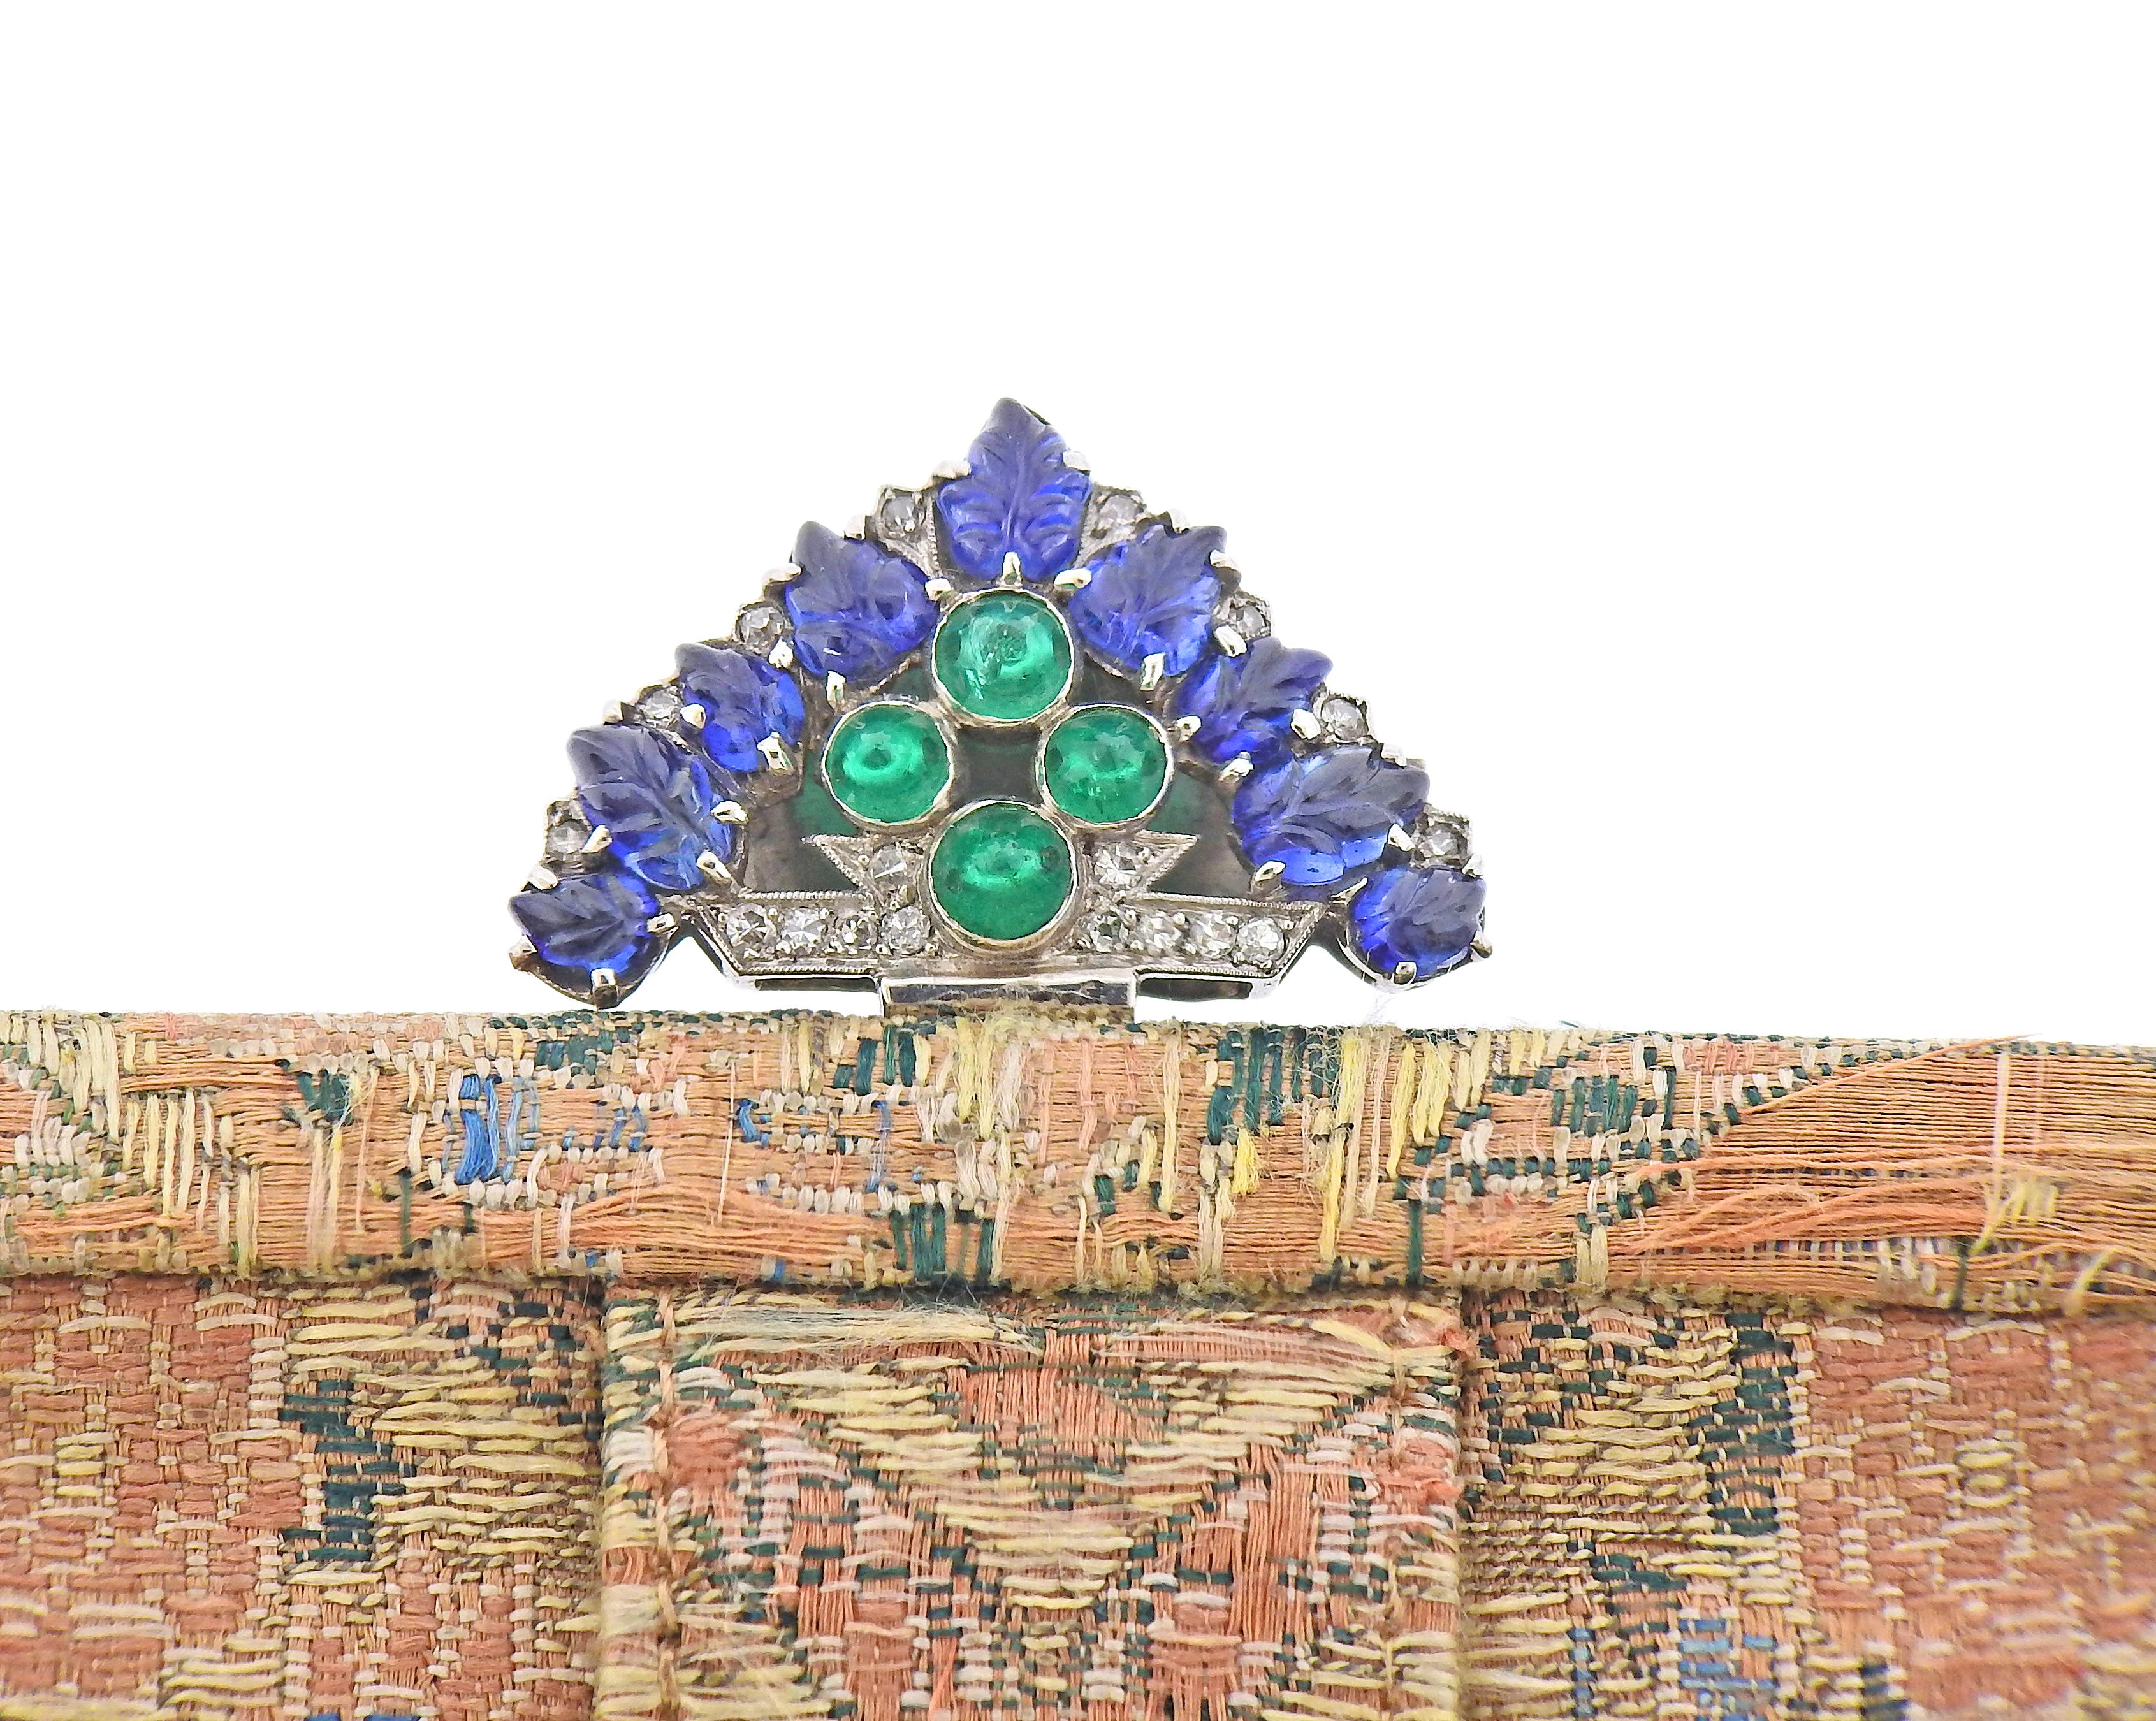 Art Deco Cartier evening clutch bag, with platinum clasp, decorated with carved sapphires and emeralds, with diamonds. Clasp measures 30mm x 18mm.  Bag measures 7